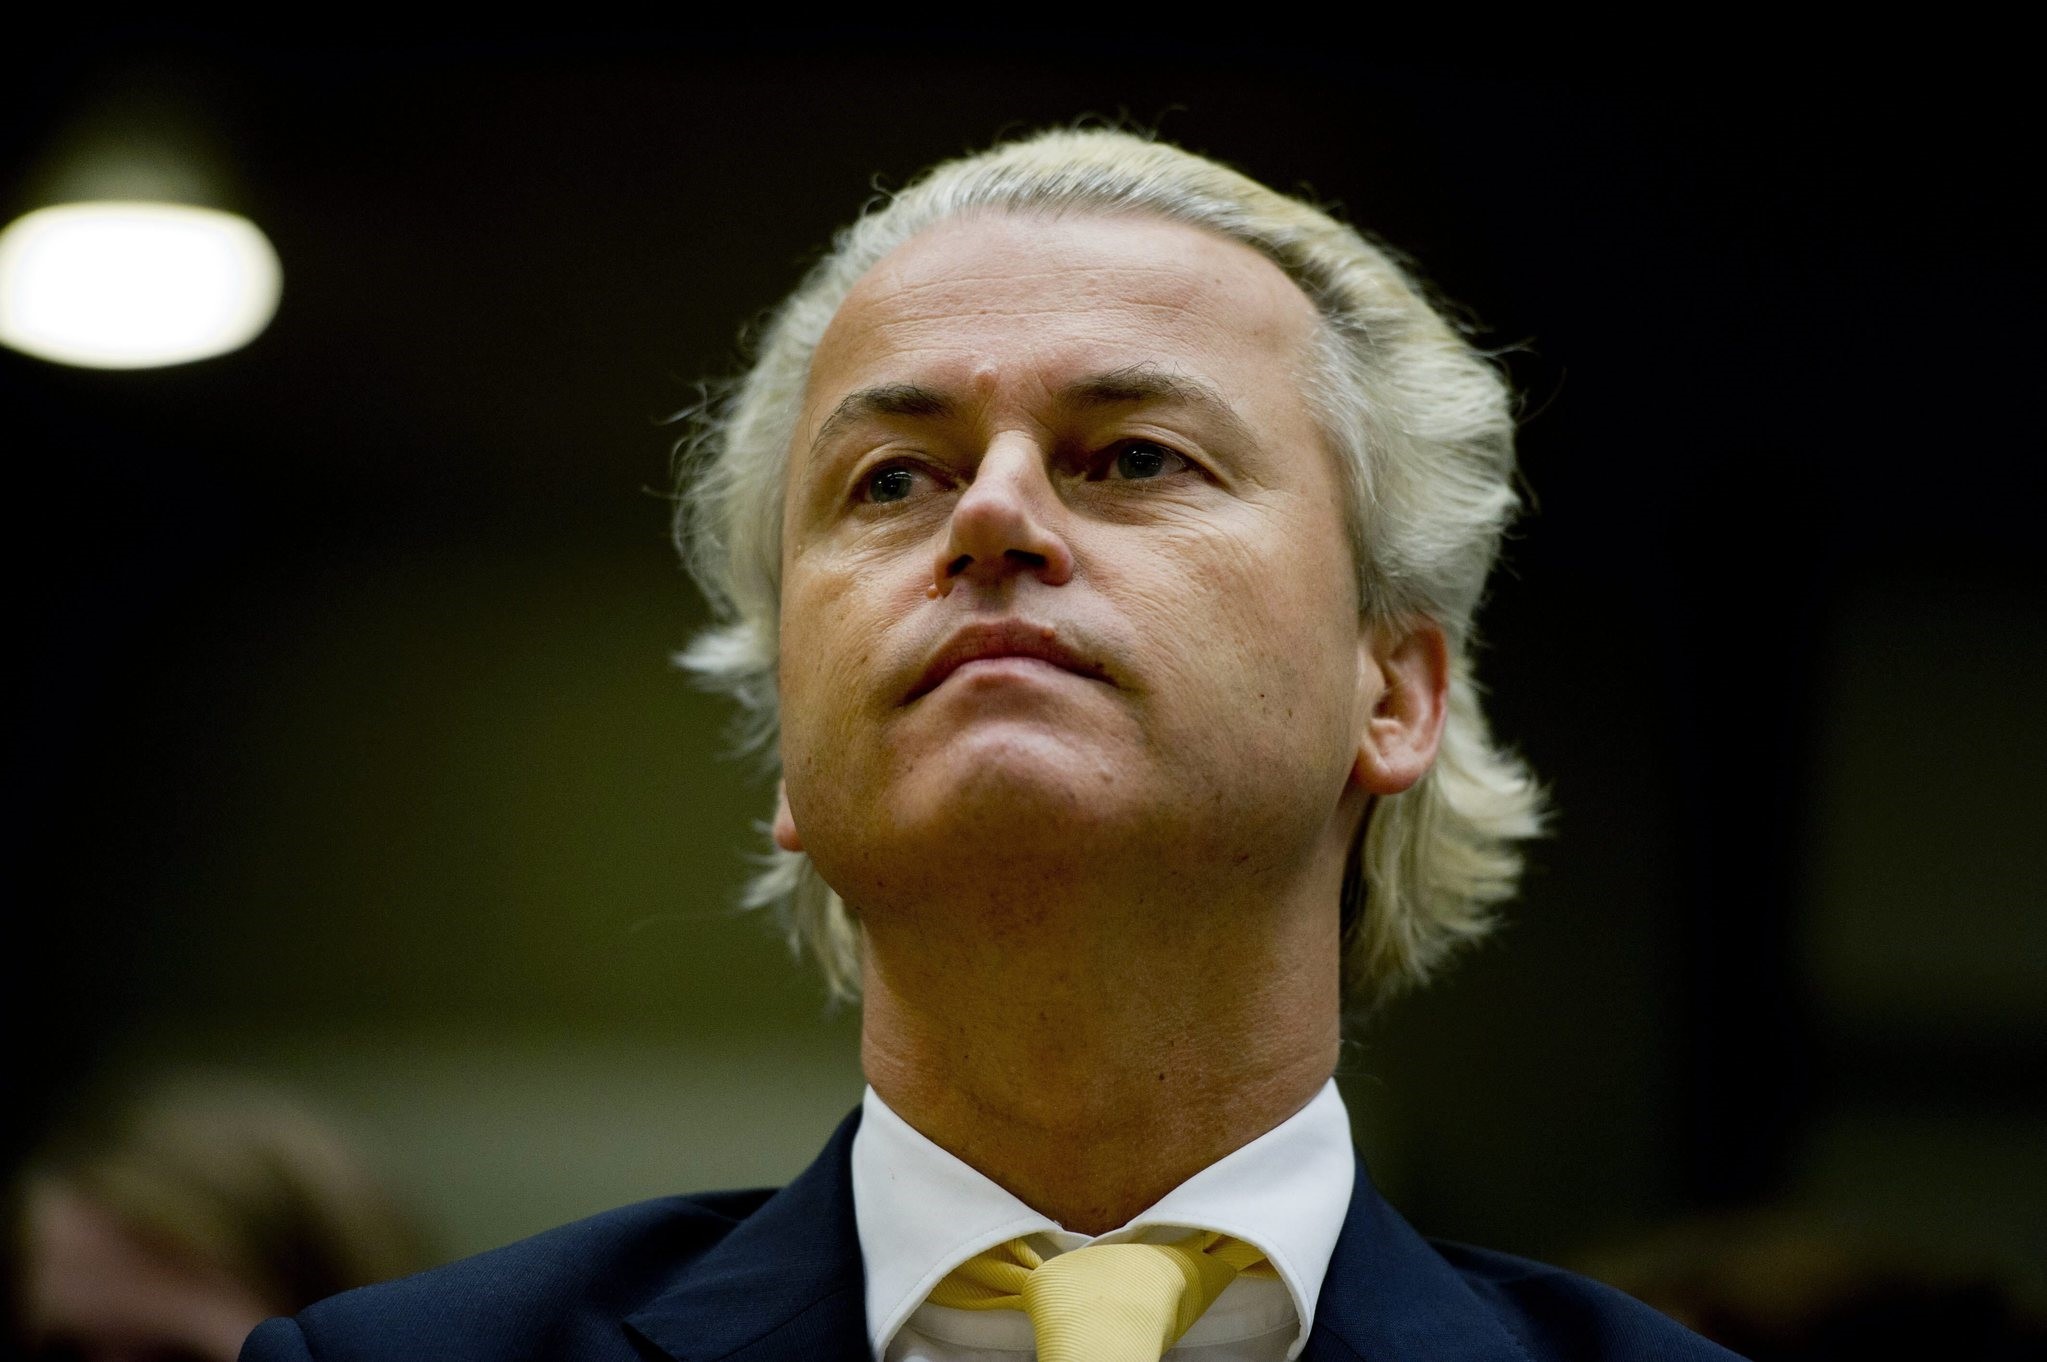 Dutch politician Geert Wilders looks on during the reading of his verdict at an Amsterdam court on June 23, 2011. (AFP Photo)